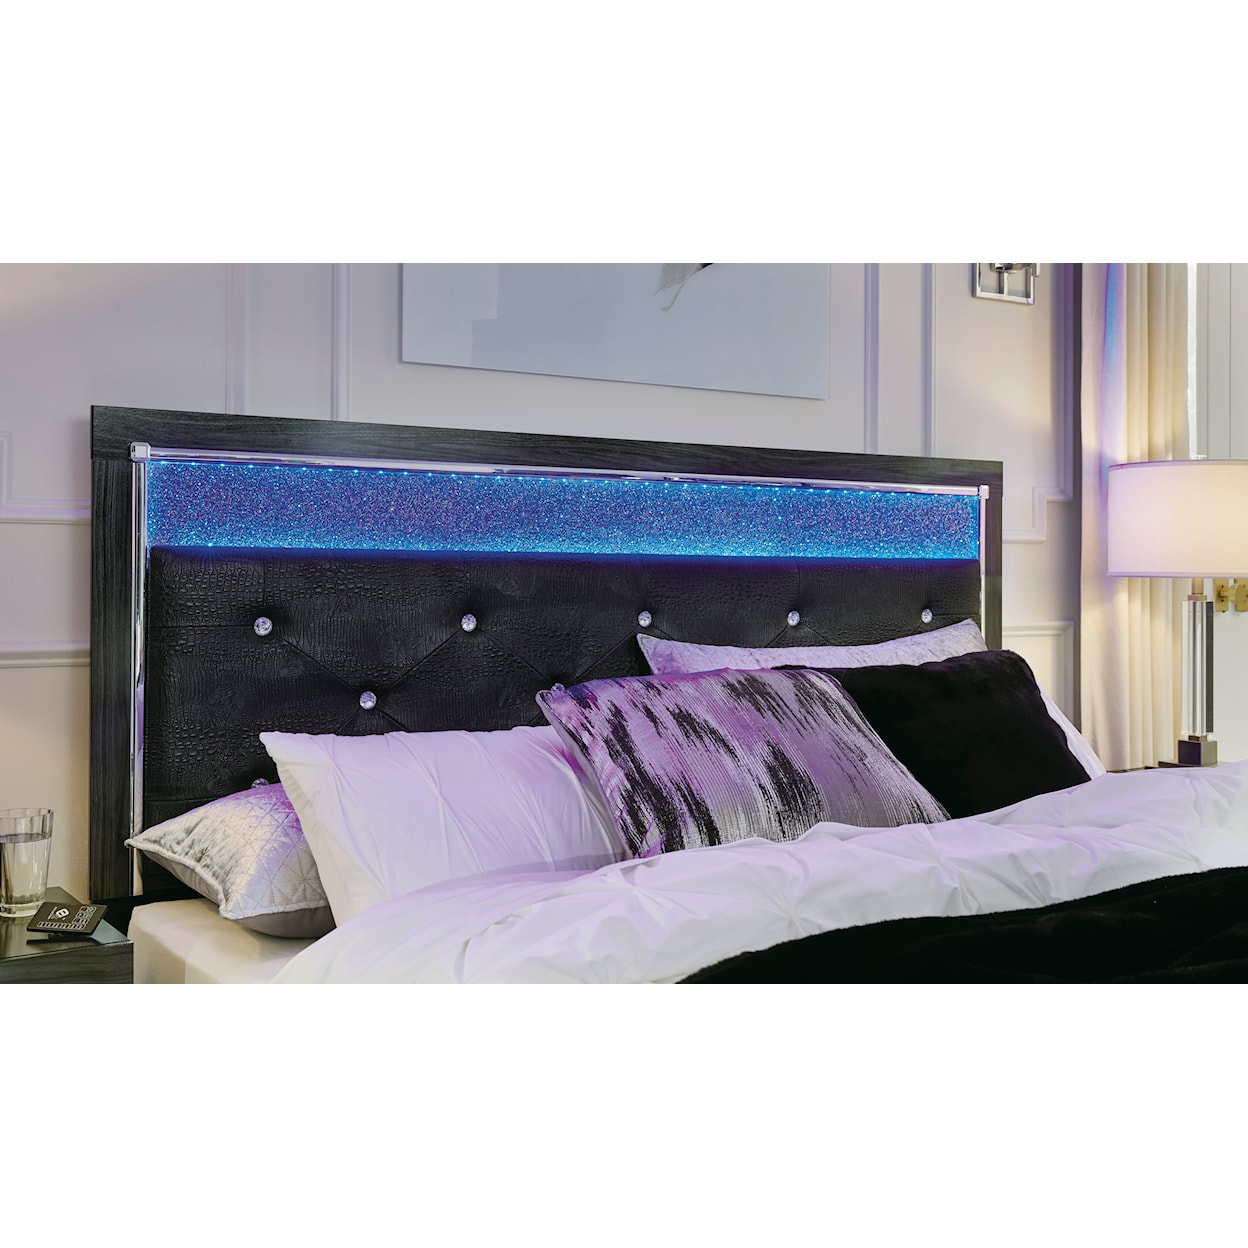 Signature Design by Ashley Kaydell Queen Upholstered Panel Headboard